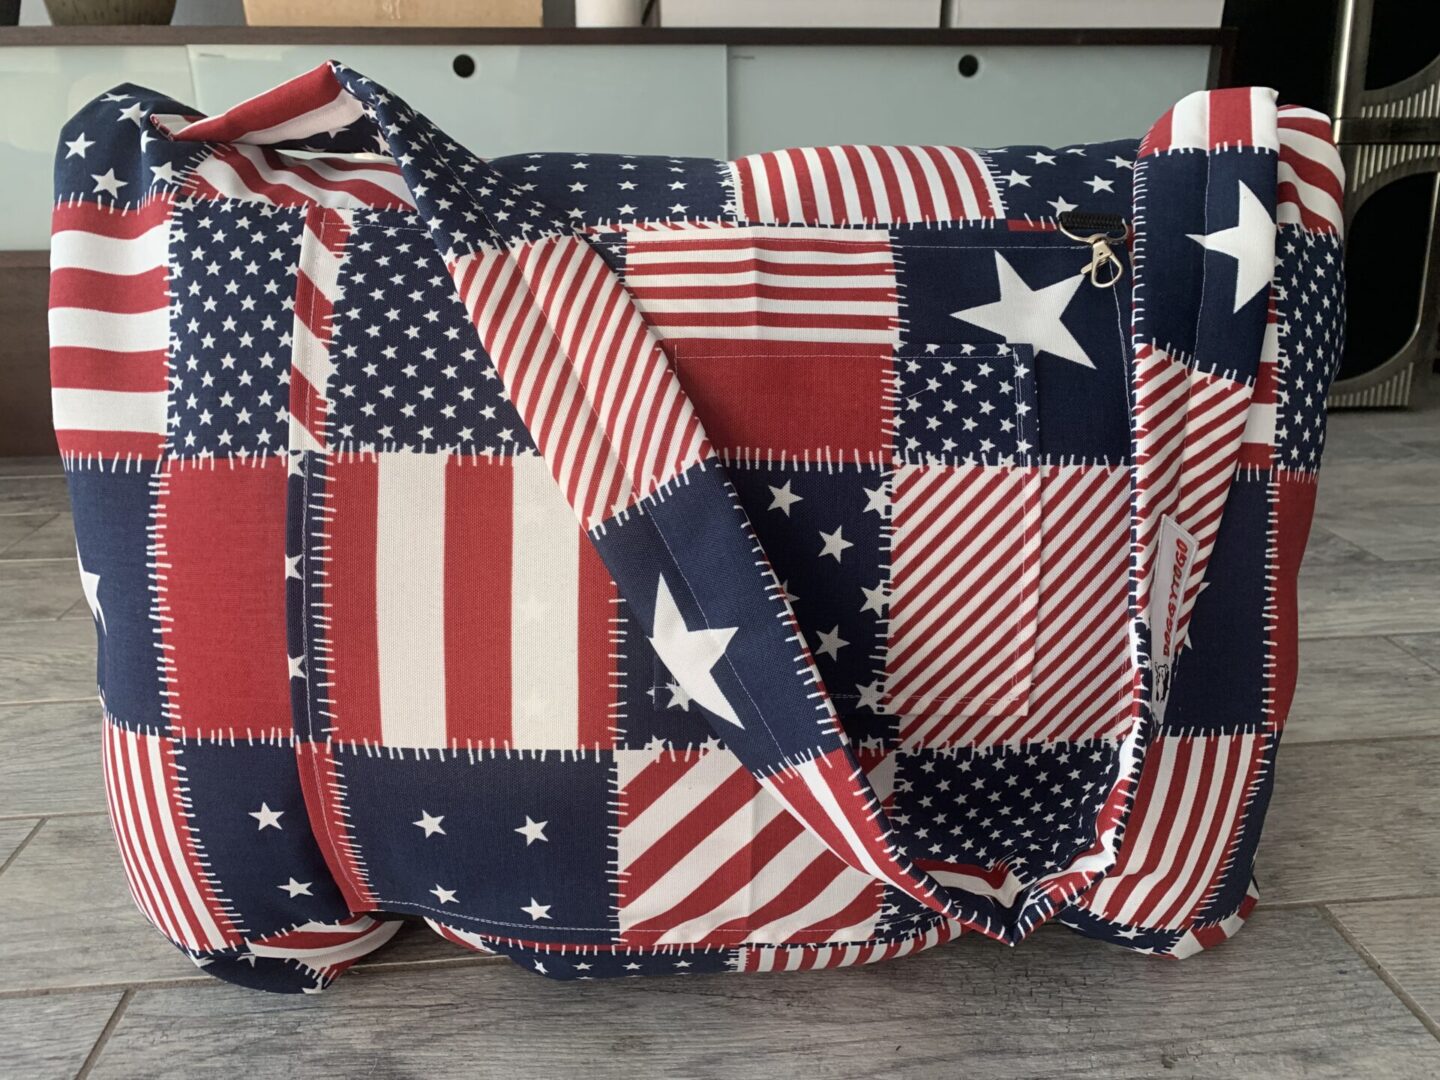 A dog bed bag with the pattern of the USA flag printed on it